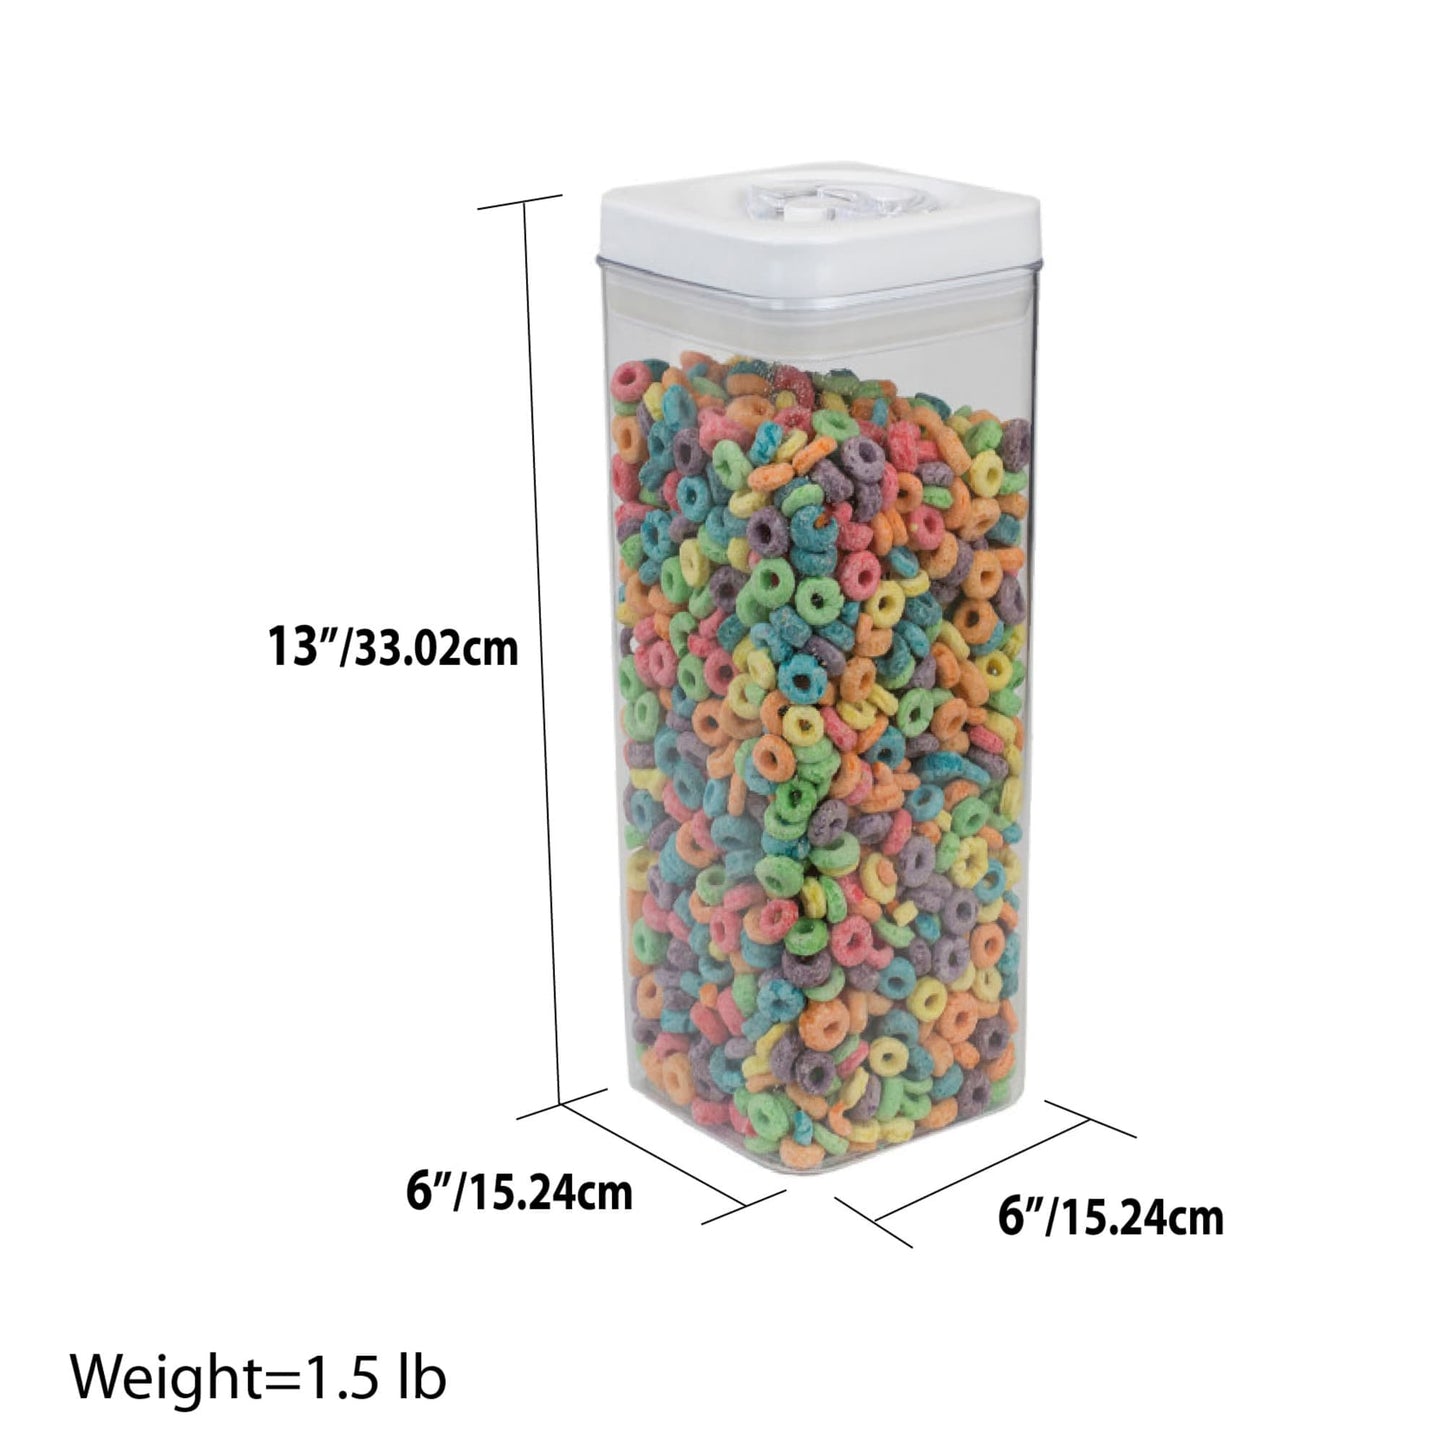 3.1 Liter Twist 'N Lock Air-Tight Square Plastic Canister, White